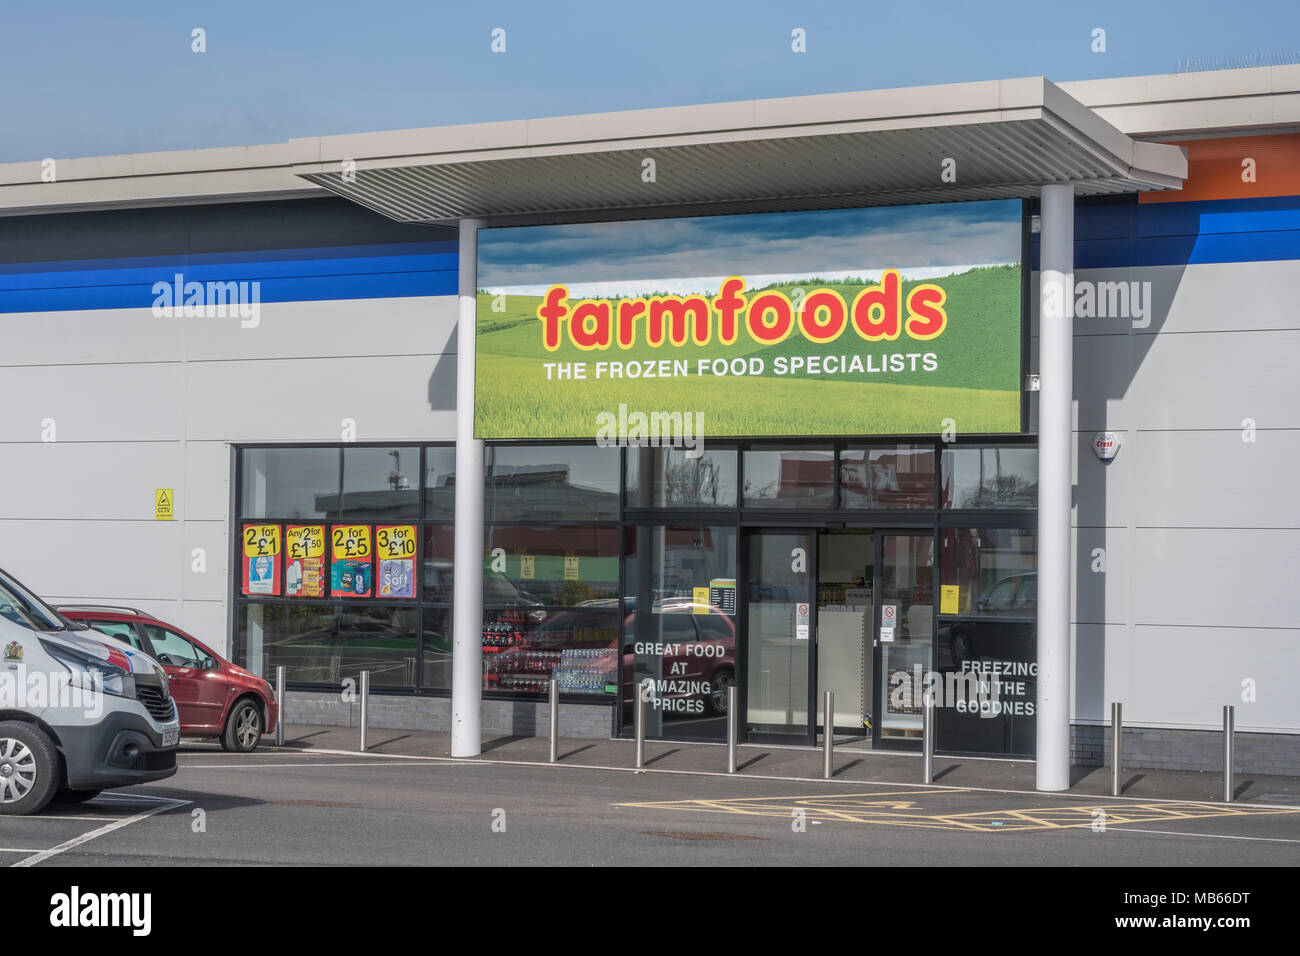 Out of Town Shop / store exterior of successful UK retailer Farmfoods at Bodmin, Cornwall. Specialises in frozen foods. Death of the High Street idea. Stock Photo